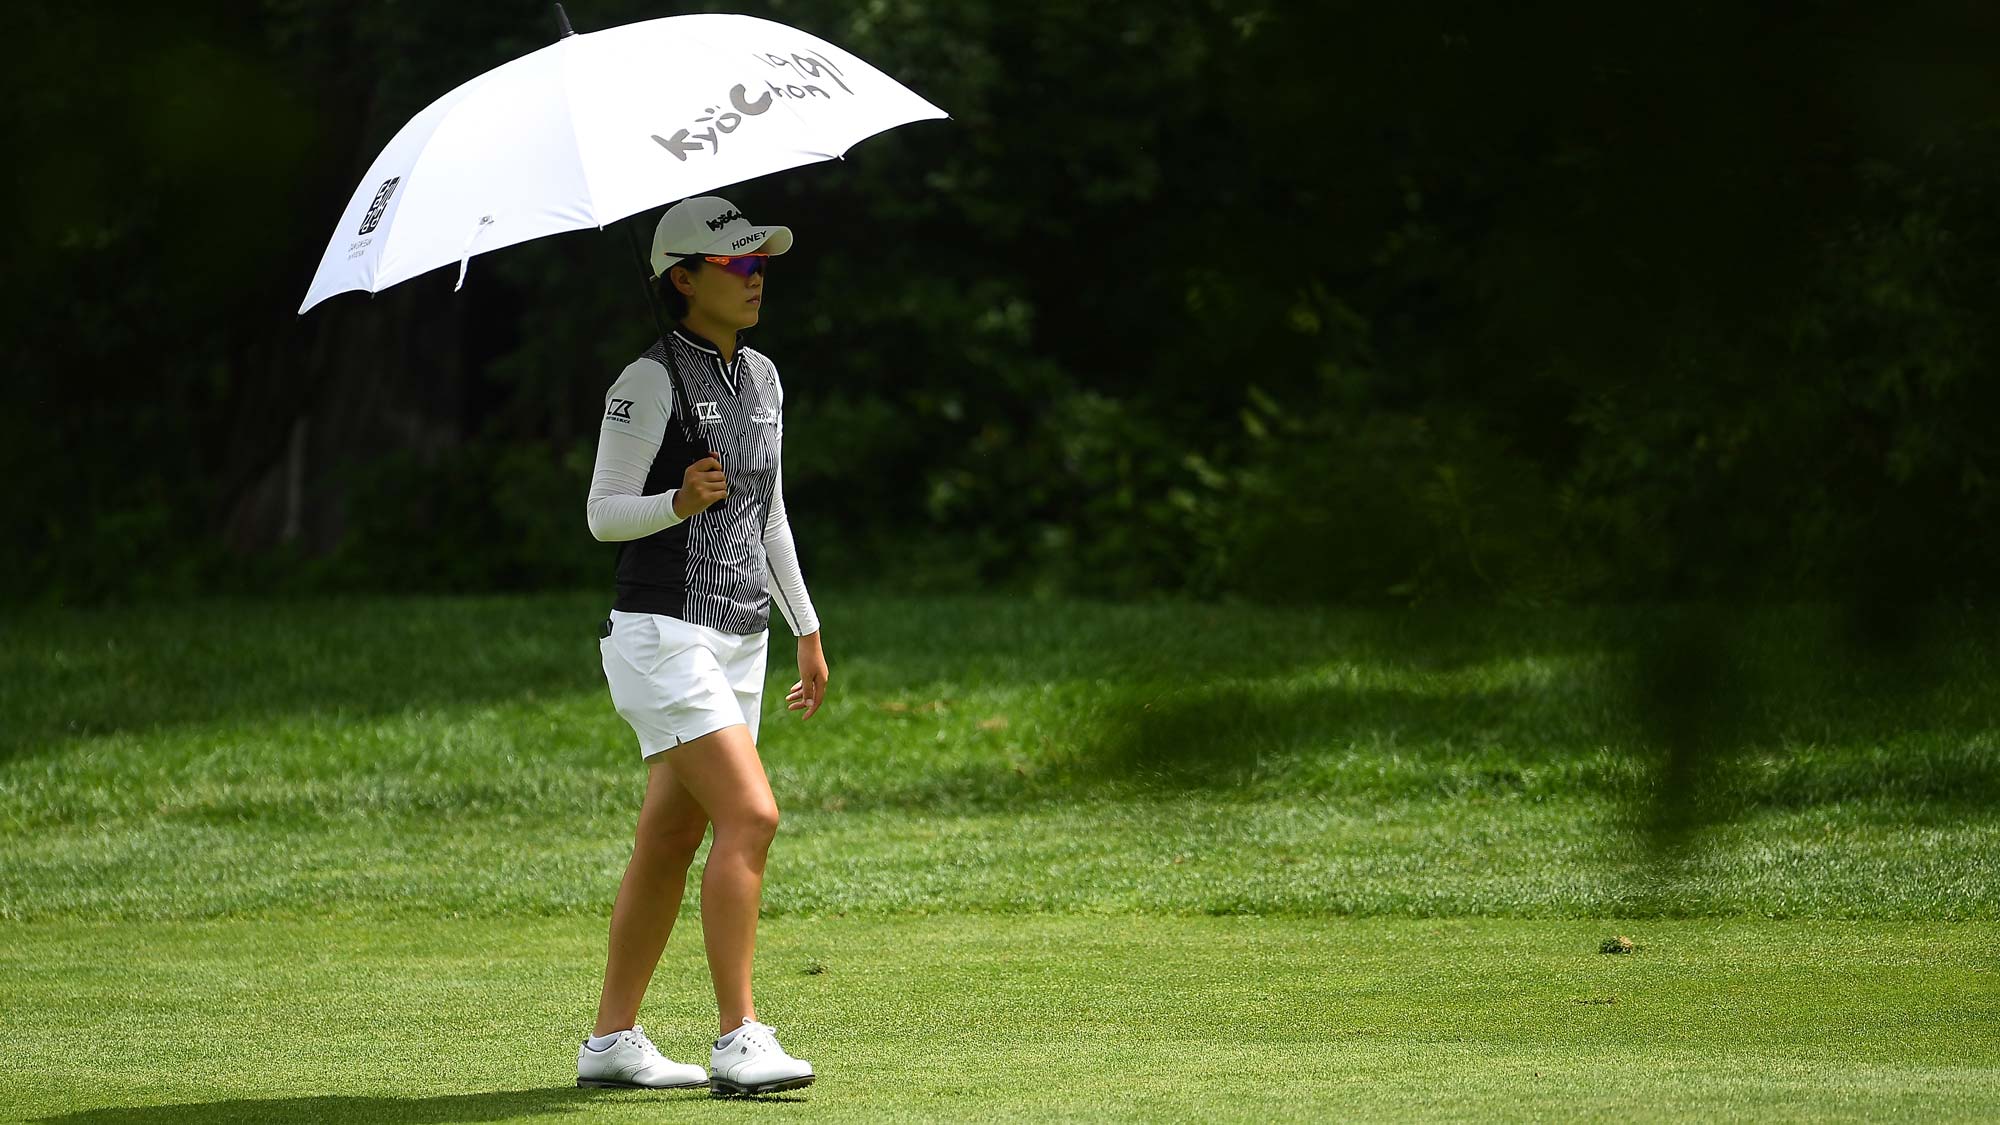 Jeong Eun Lee of the Republic of Korea walks down the first fairway during the second round of the Thornberry Creek LPGA Classic